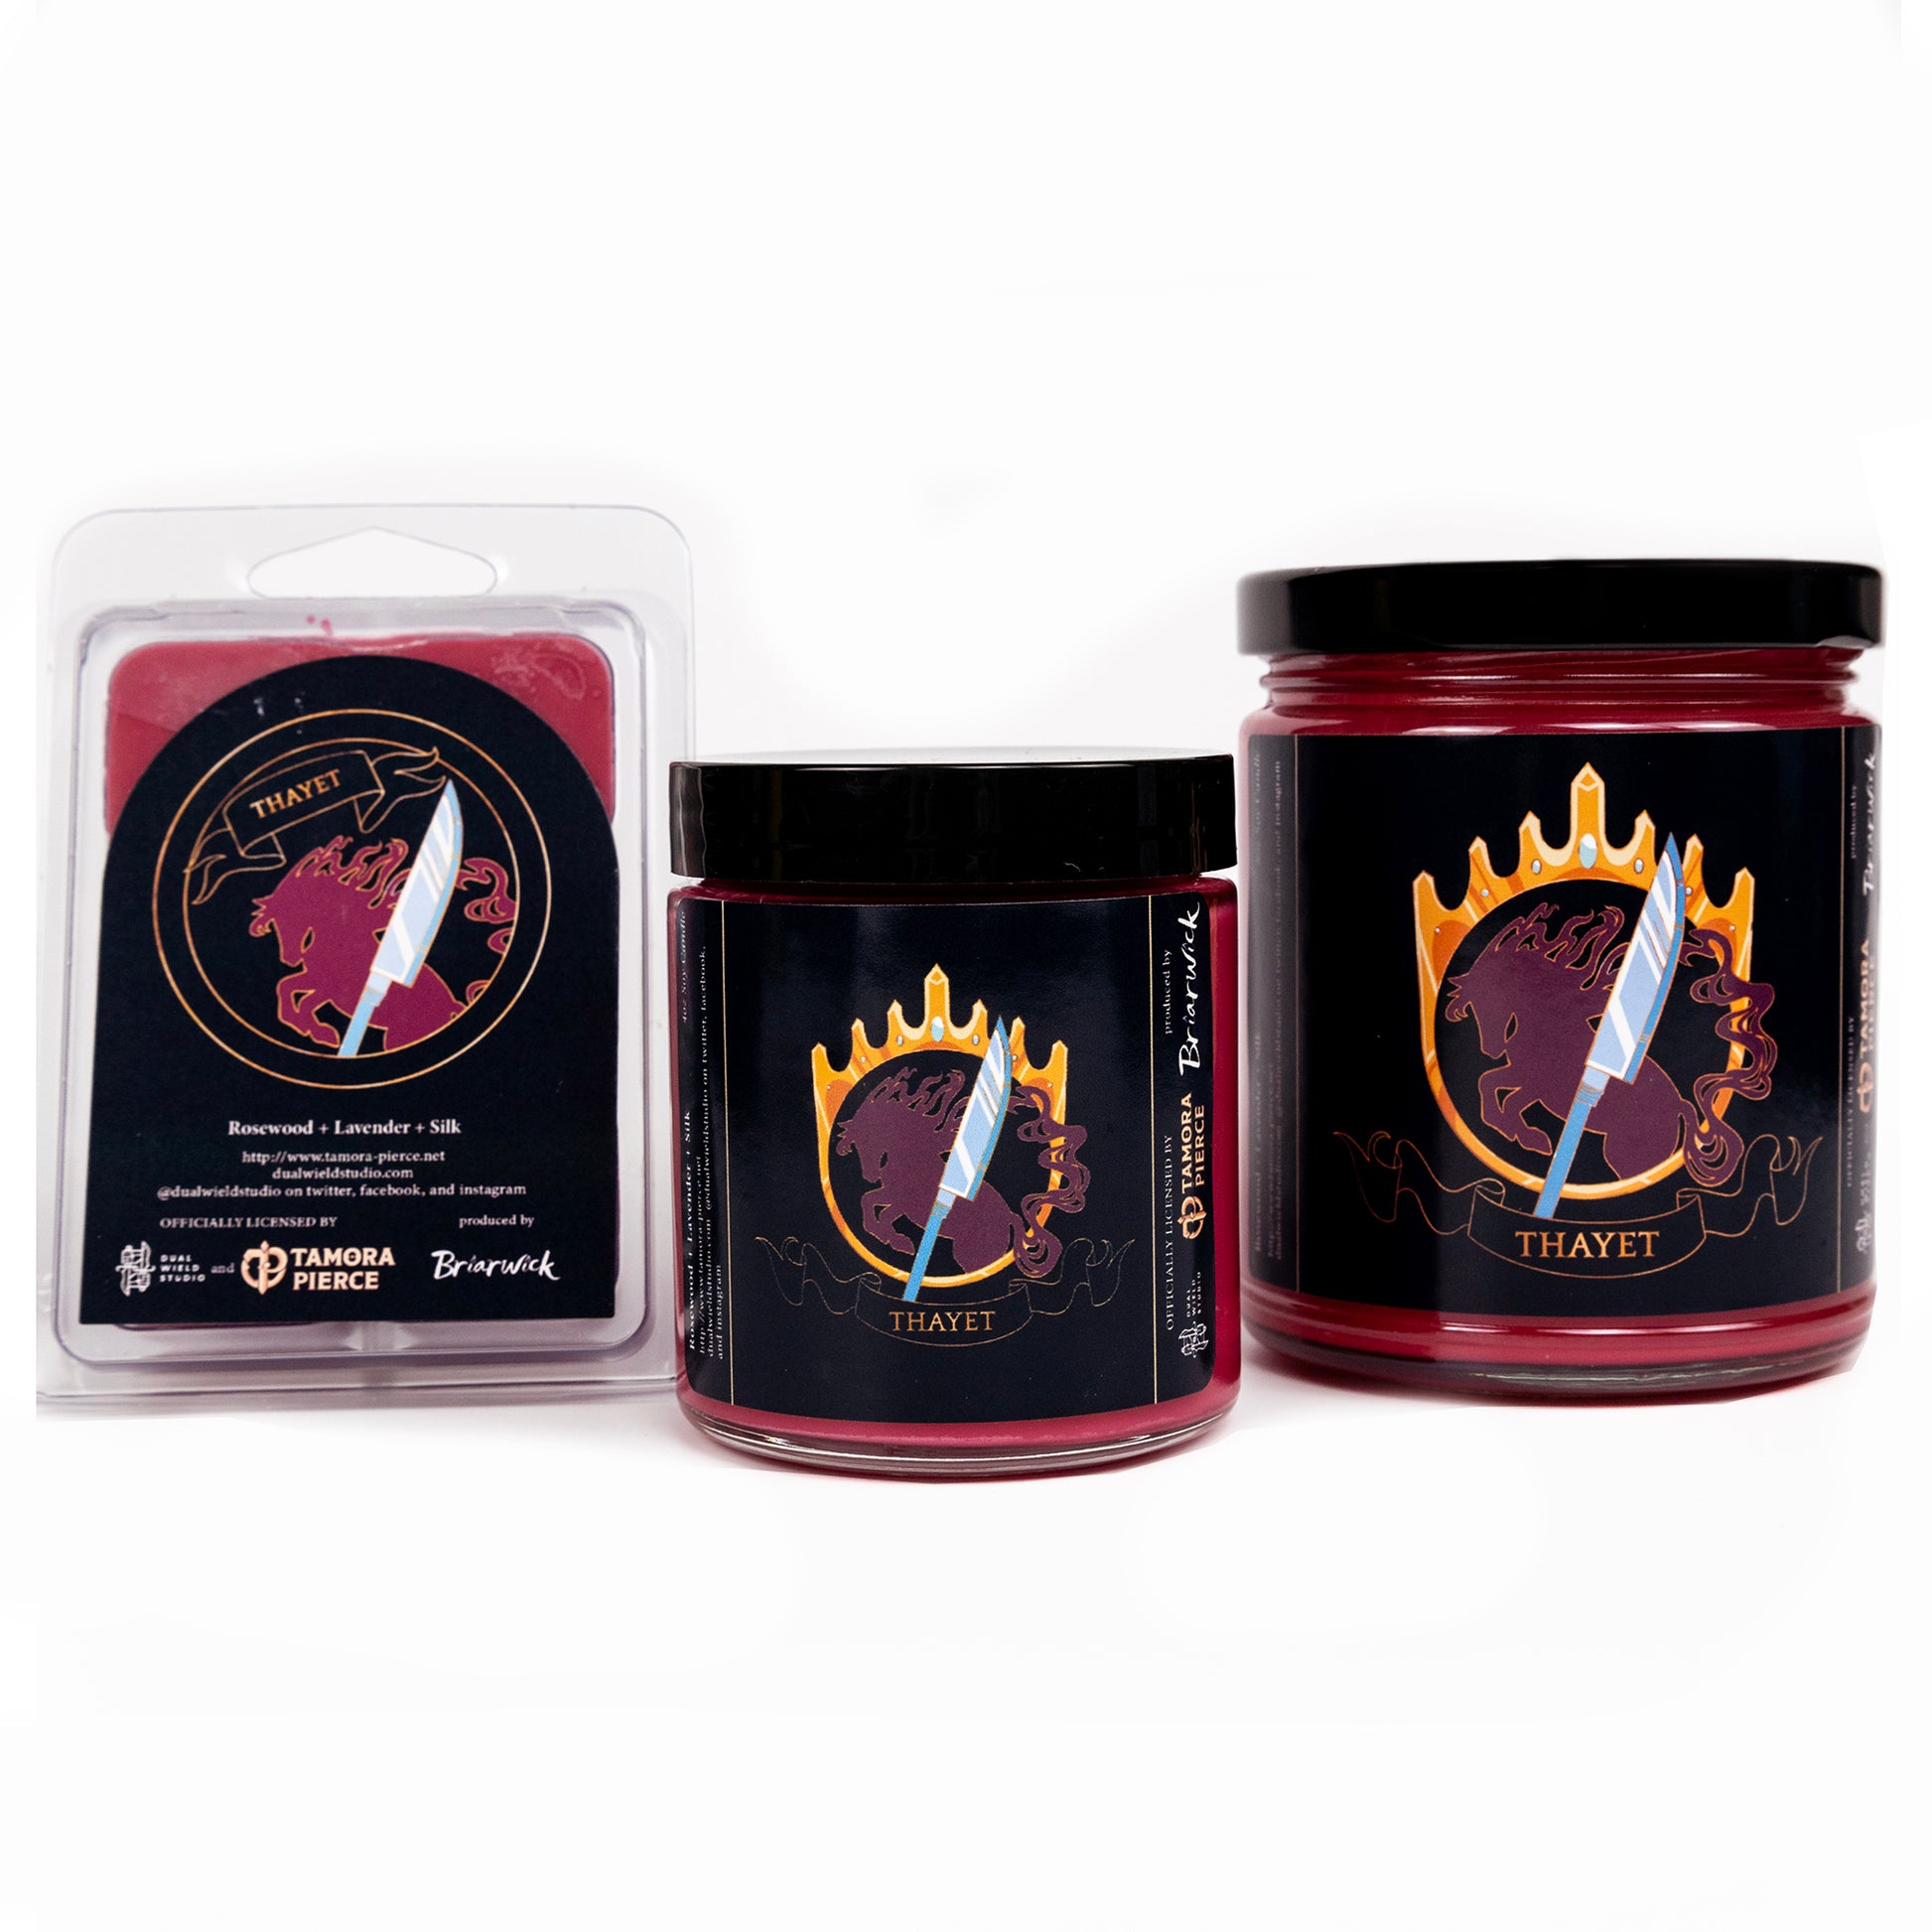 Full set of both Thayet candles and wax melts, all with red wax. The label illustration shows the silhouette of a leaping horse within a golden crown that also forms a ring. A silver glaive shines in the foreground with "Thayet" written on a ribbon below.